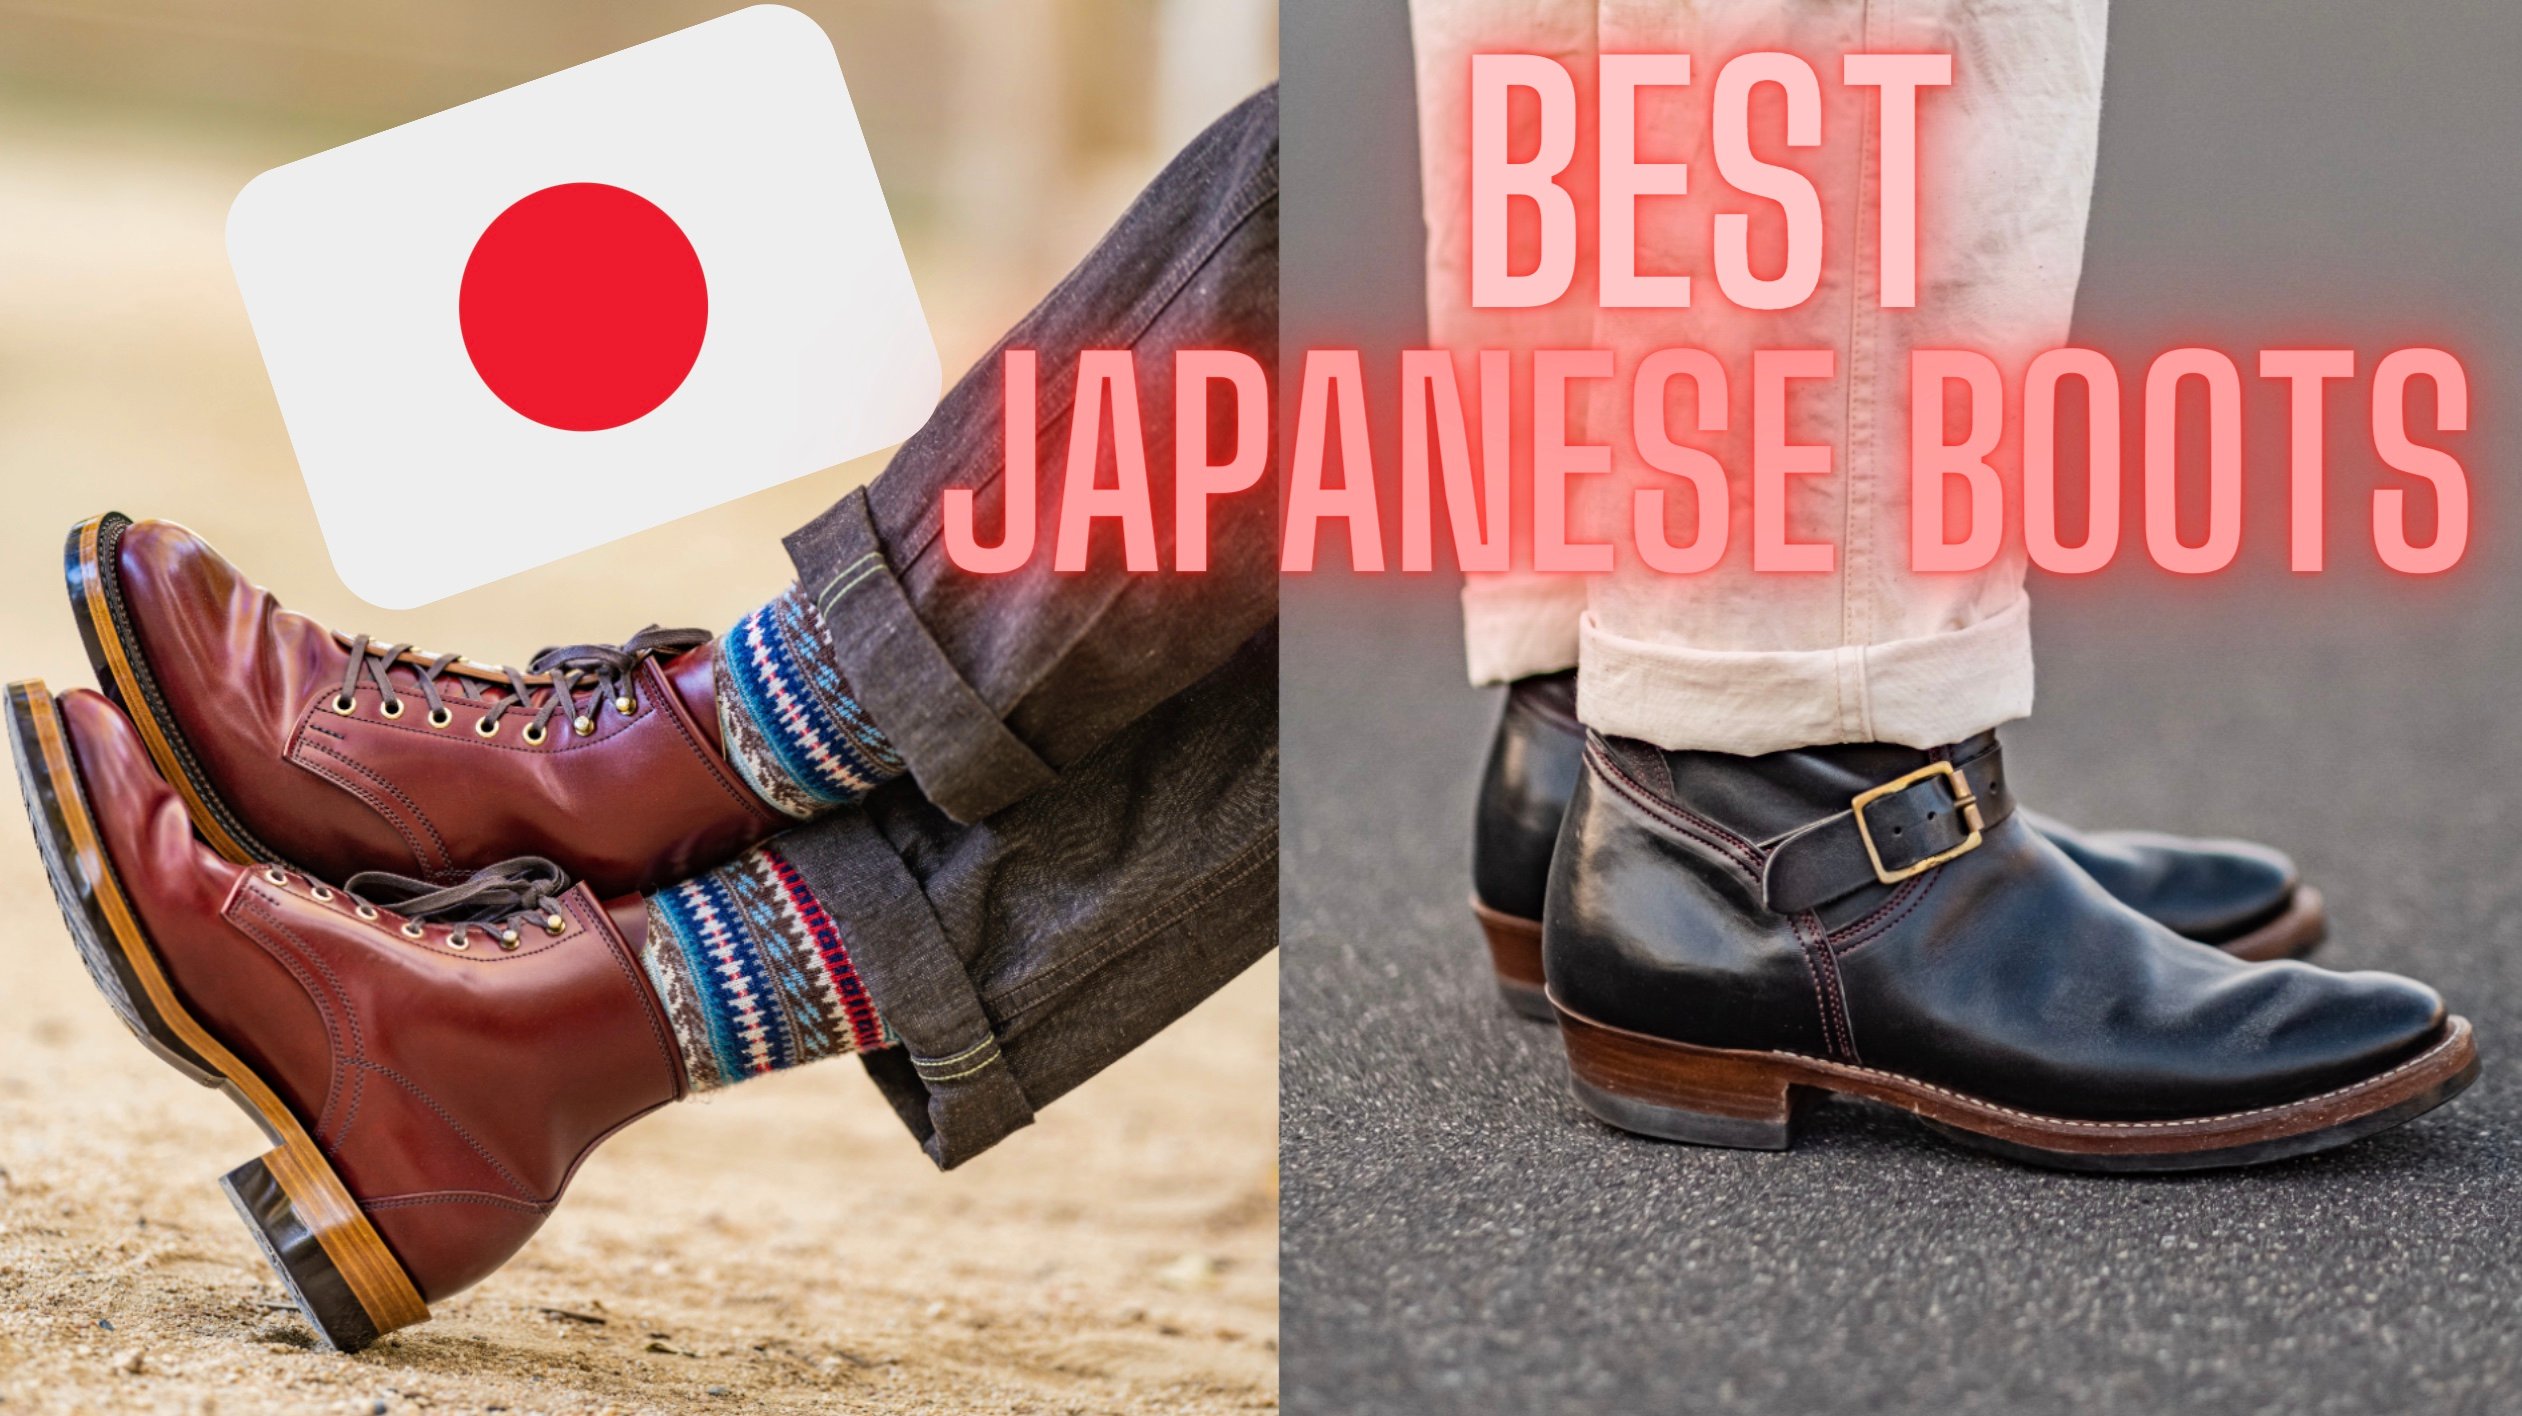 The 5 Best Japanese Boot - stridewise.com